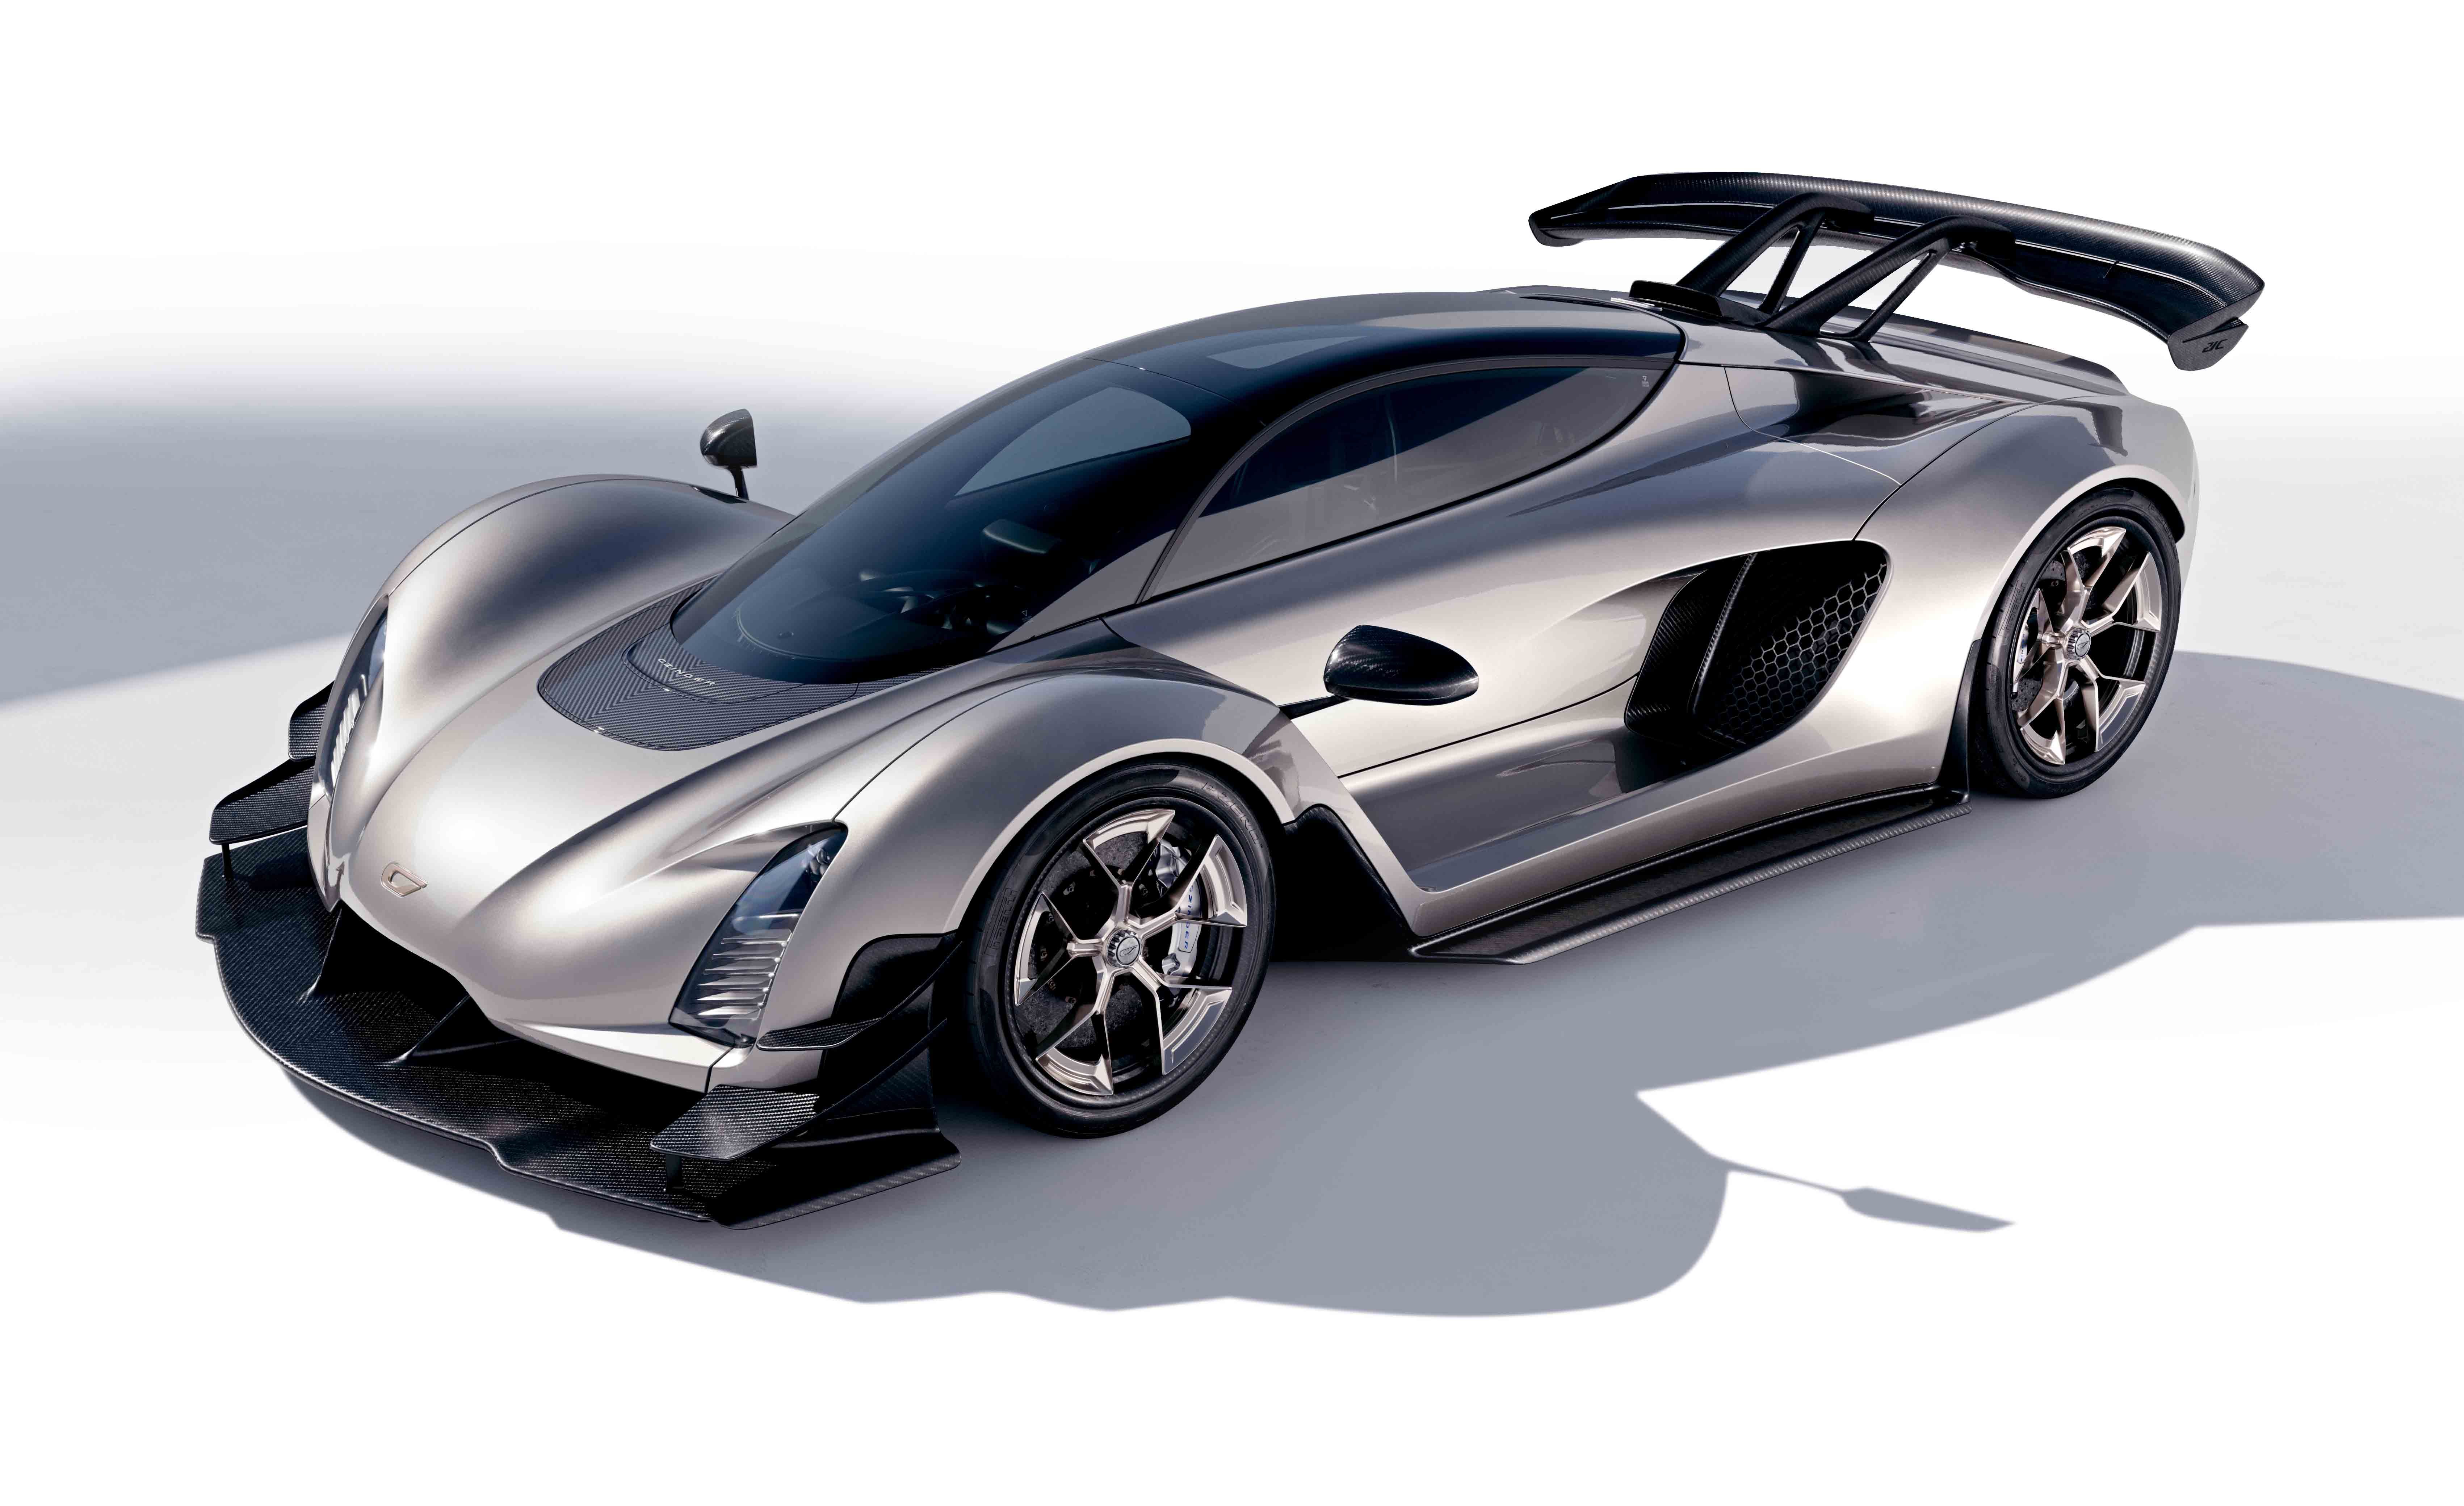 Customized 3d Model Of A Sleek Unbranded Sports Car Racing On The